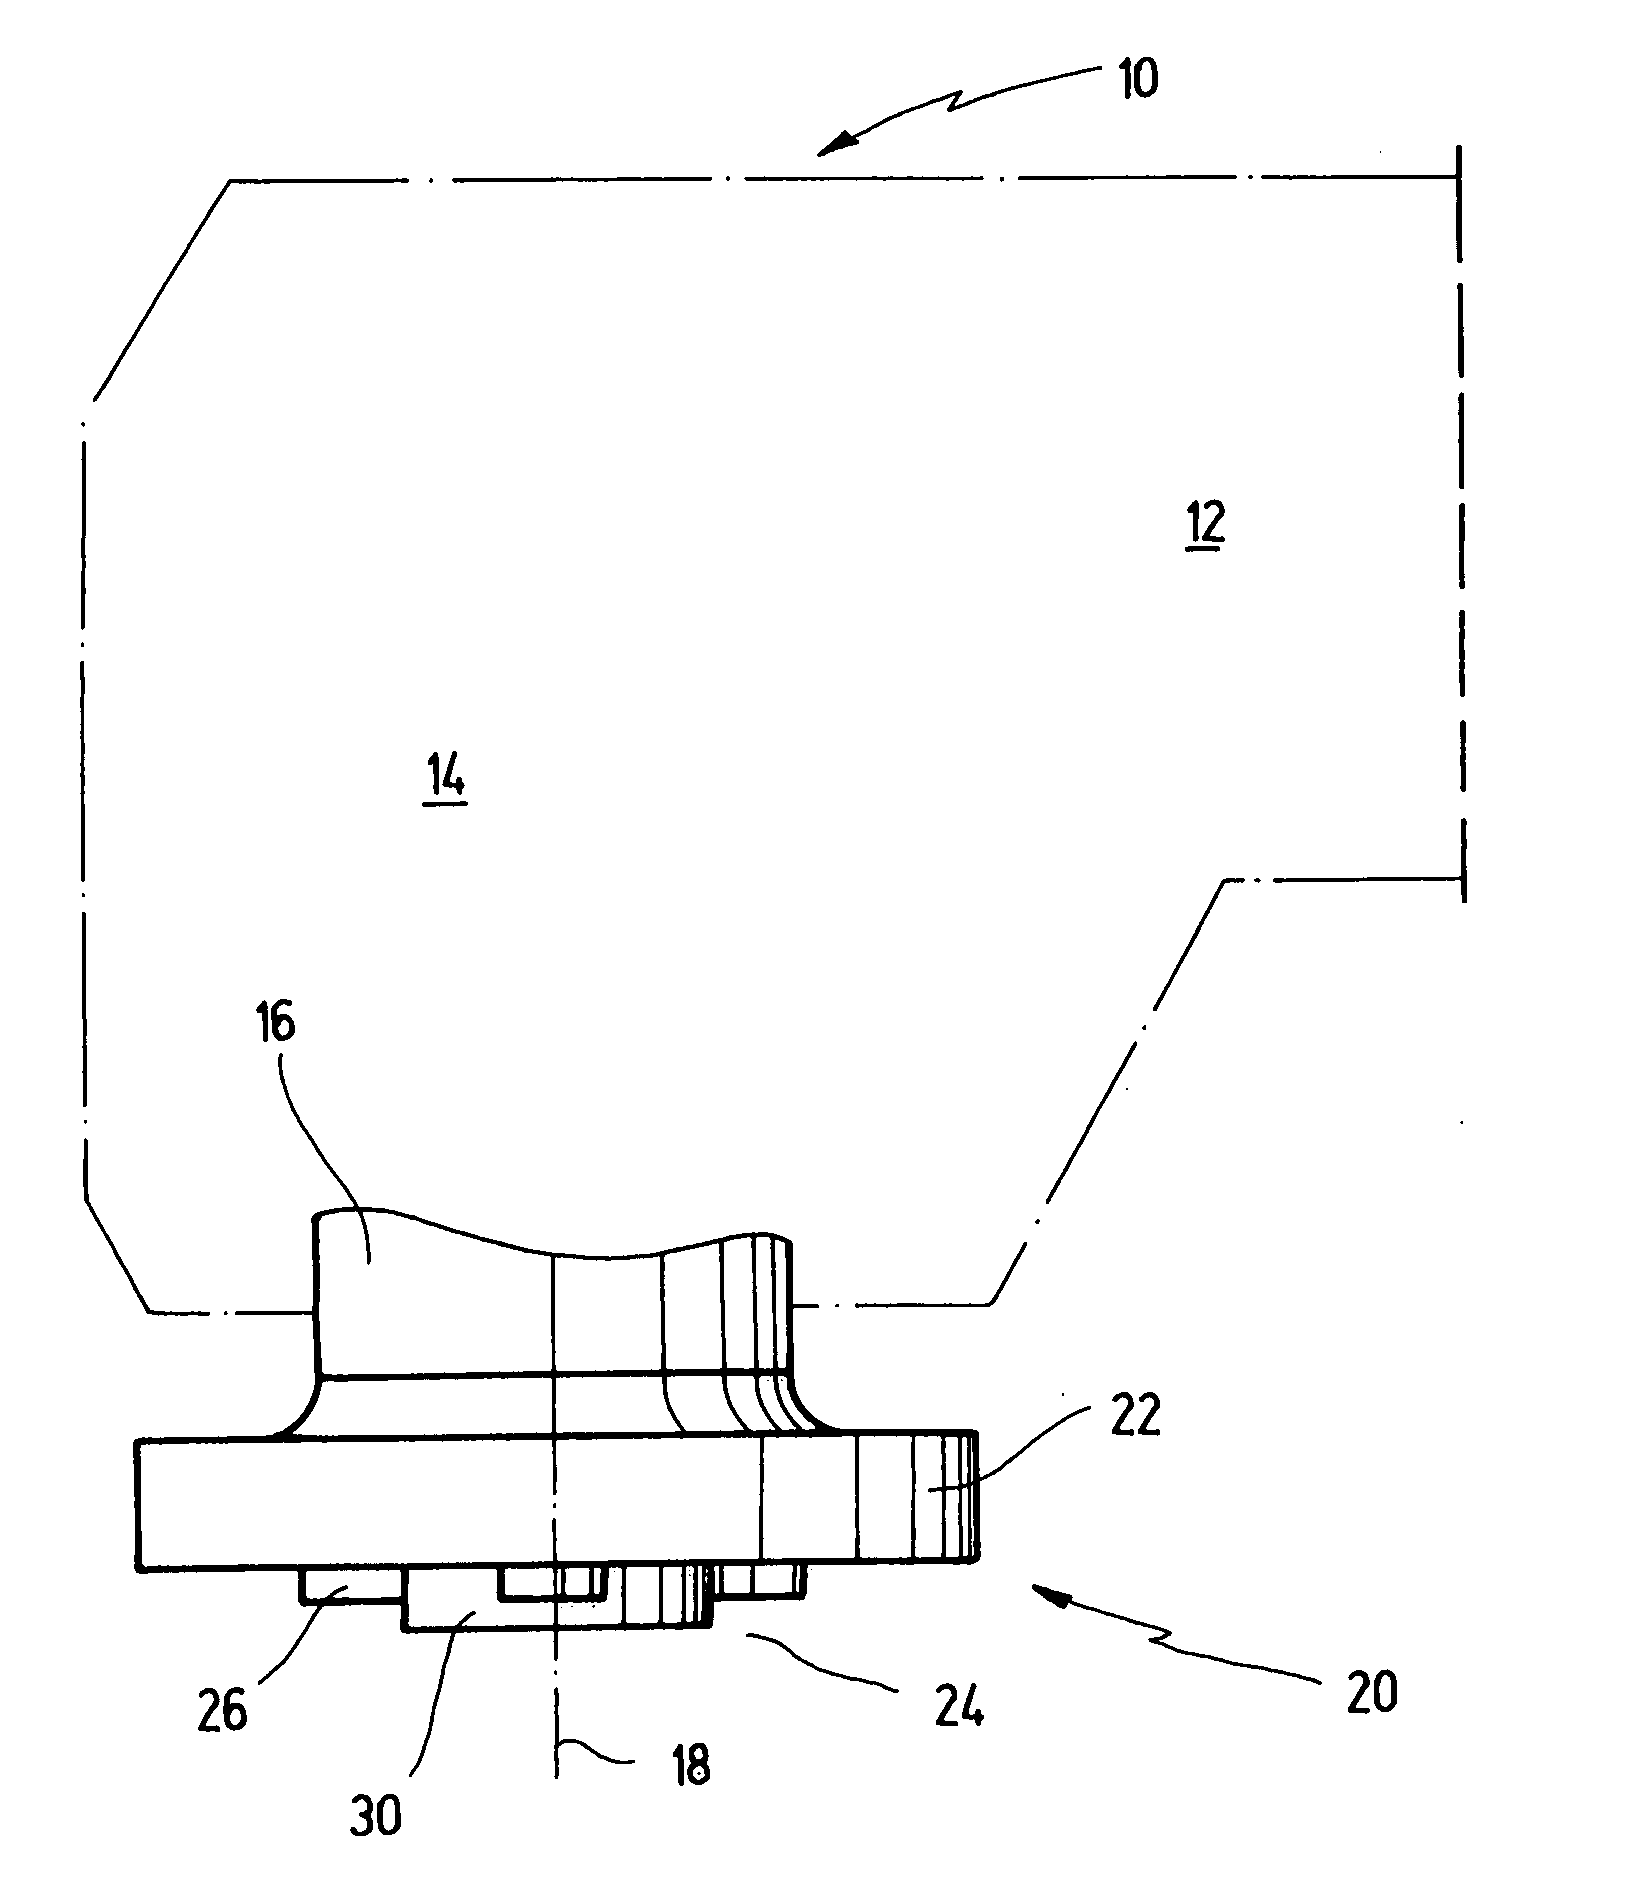 Power tool having a receptacle for securing a tool